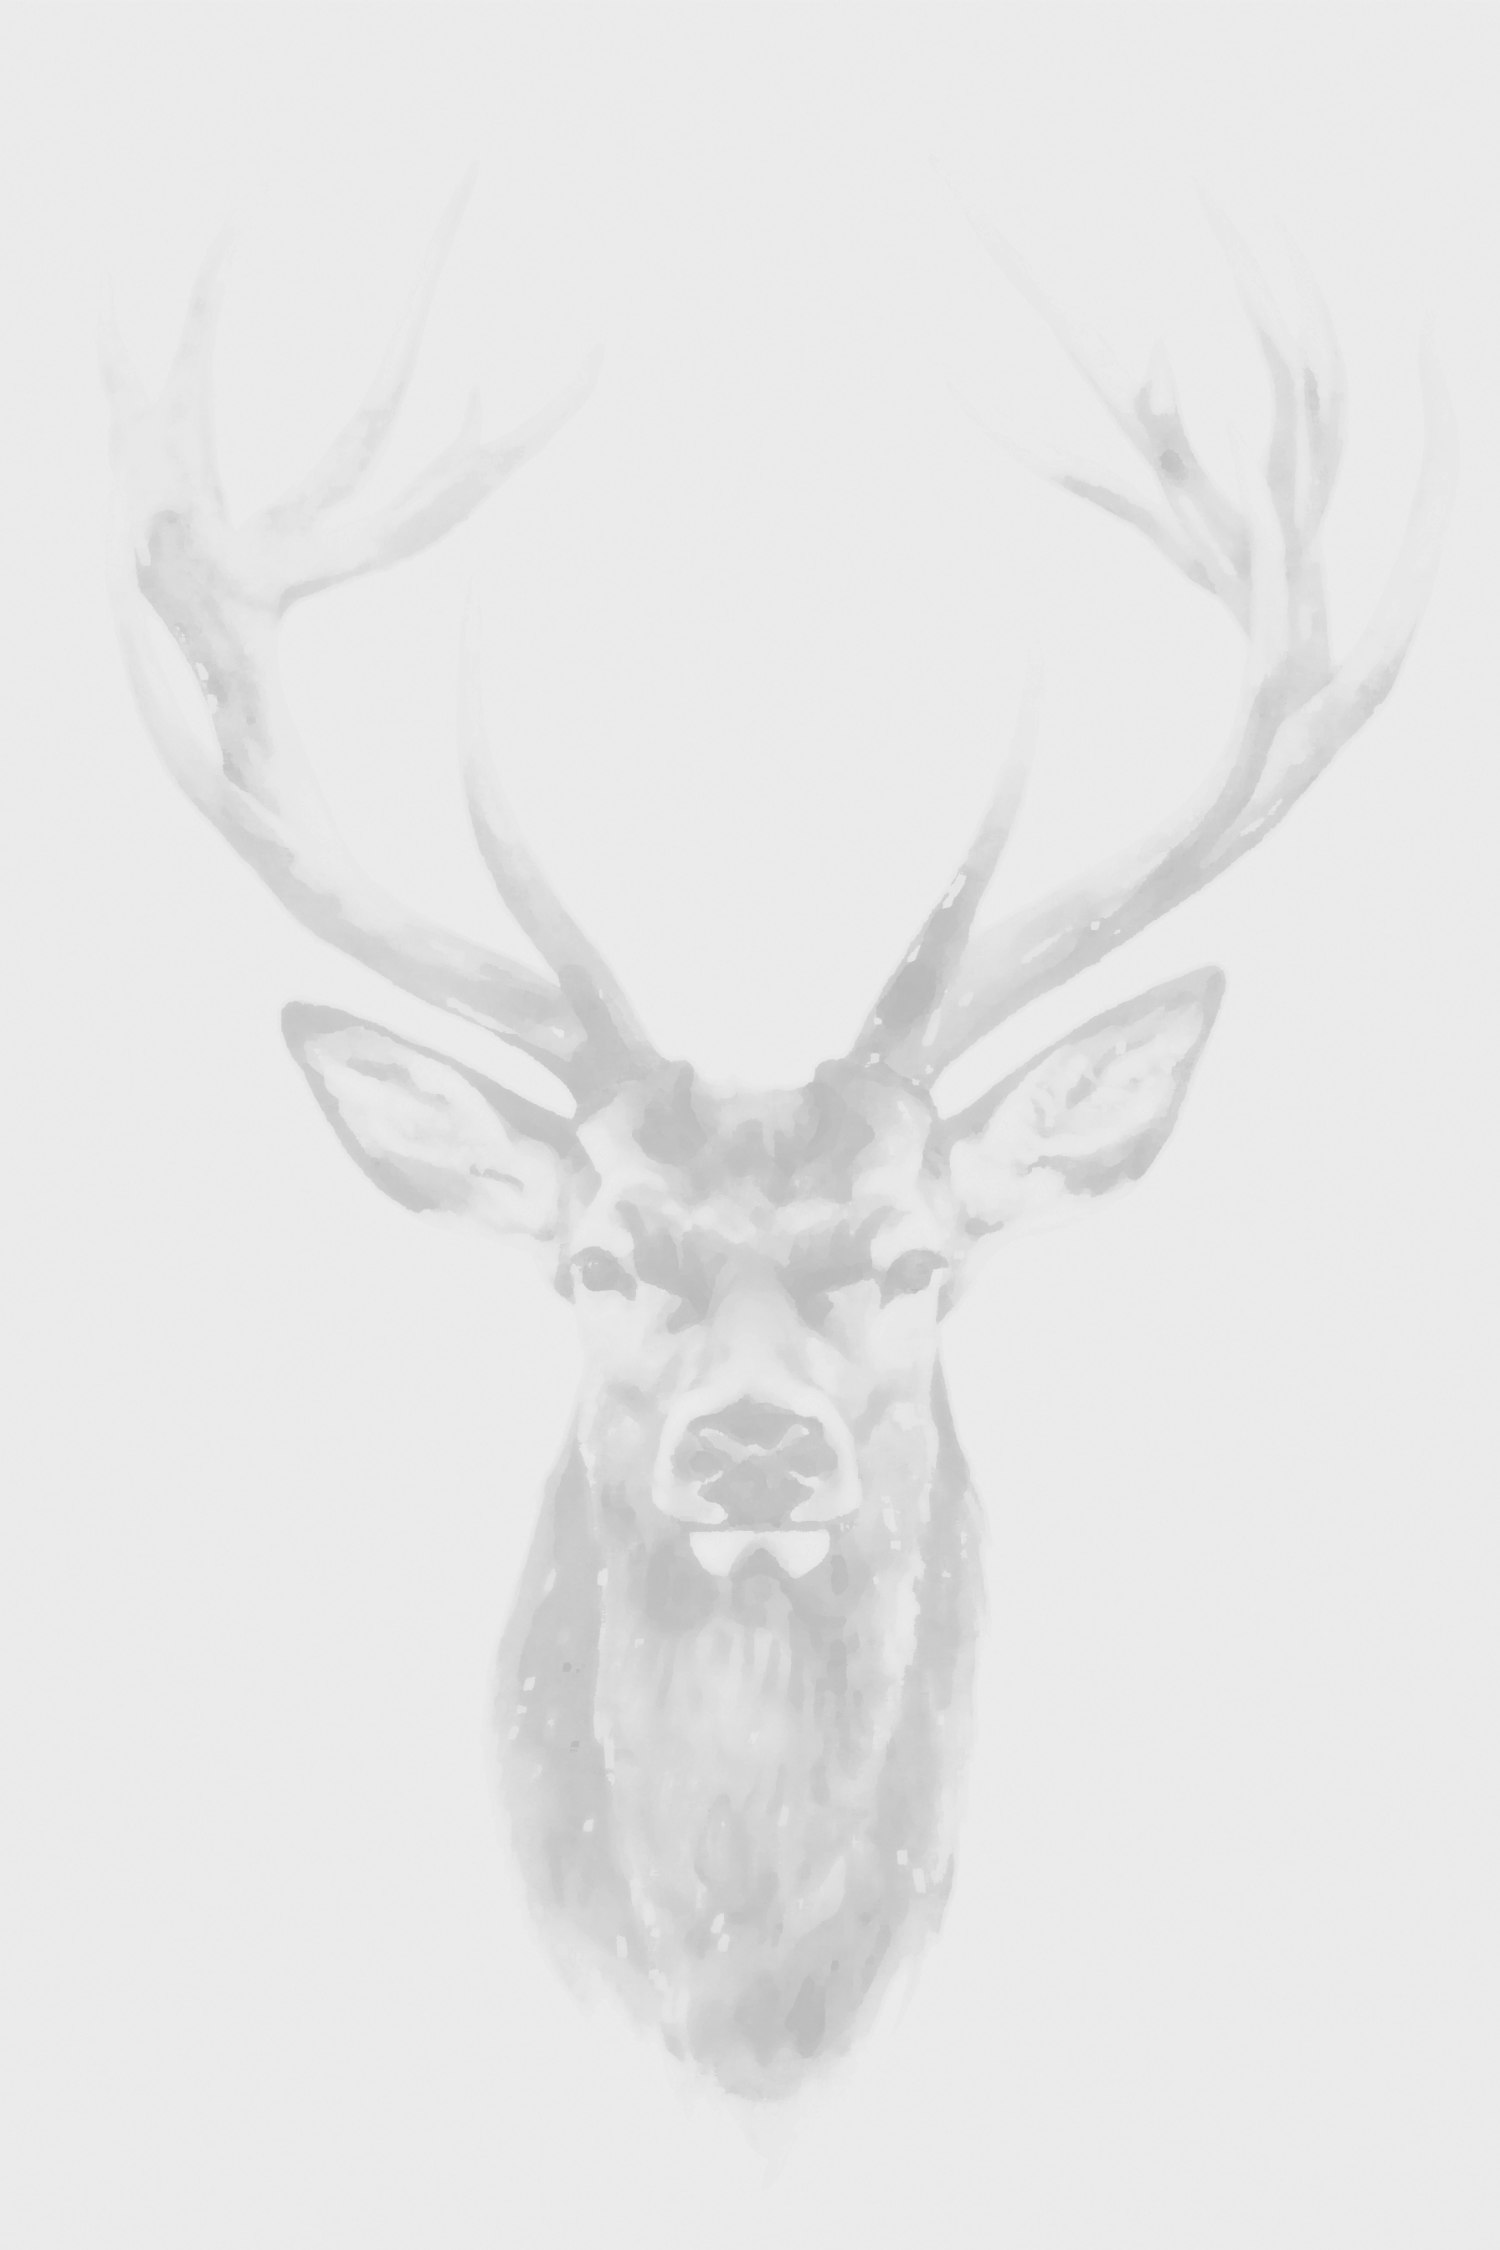 Stag Image